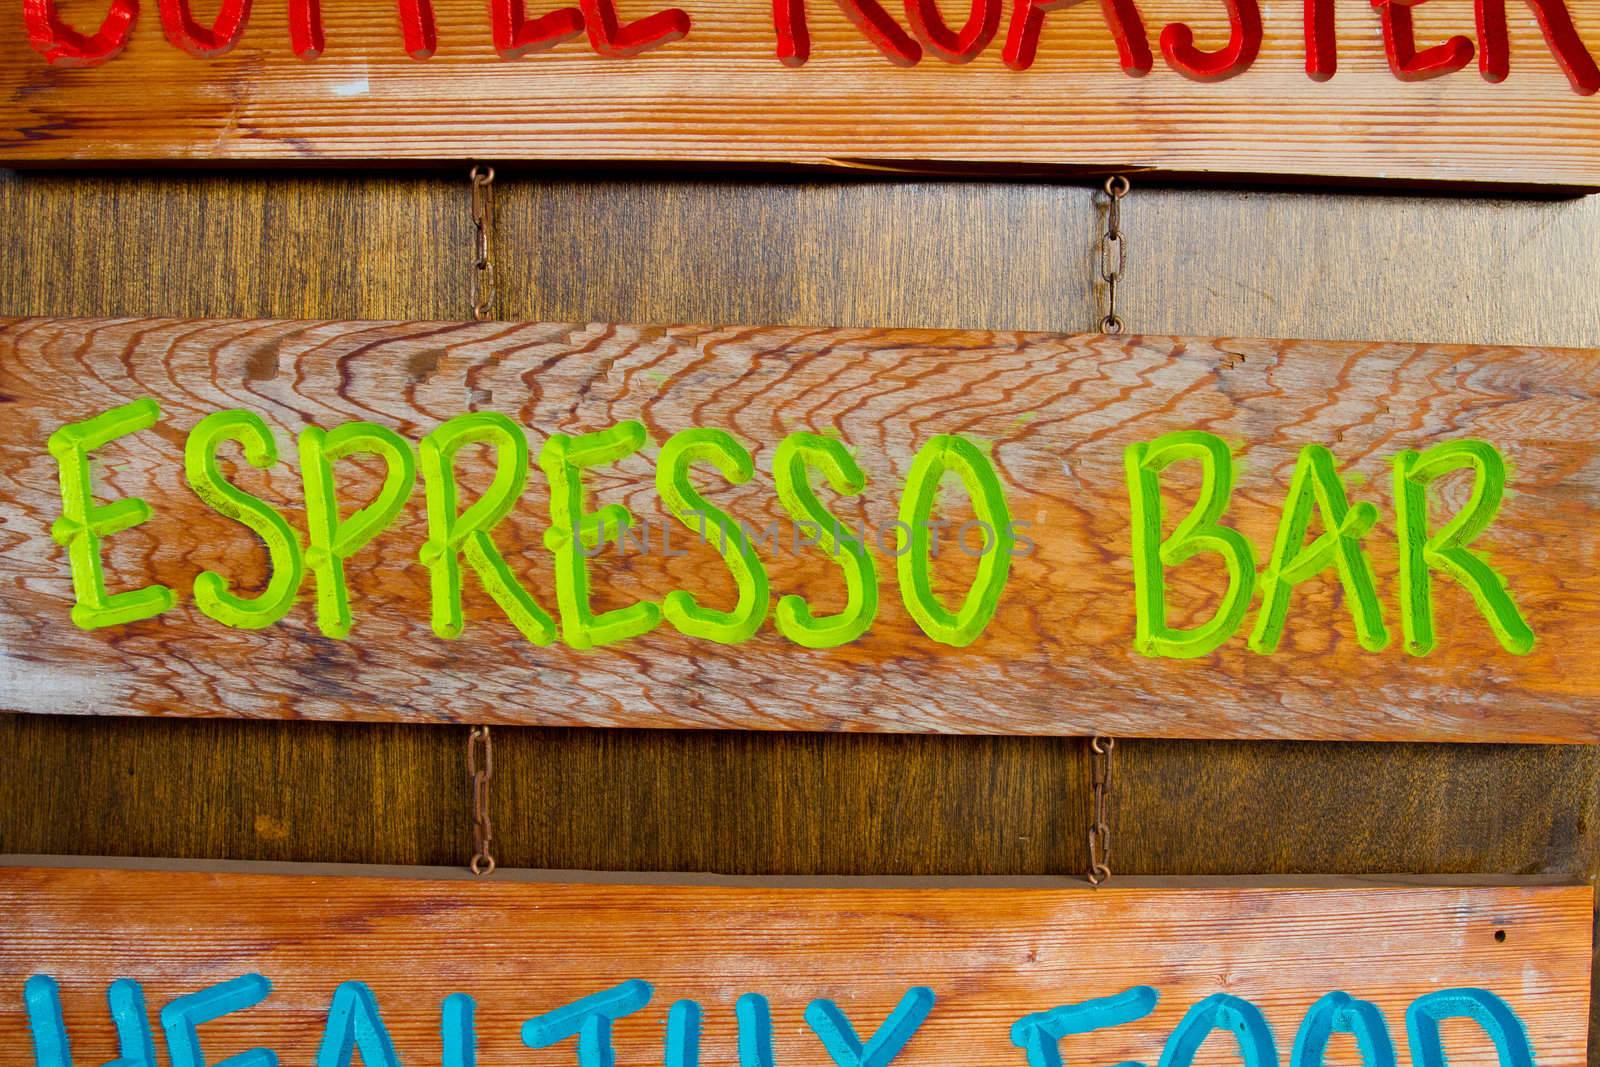 A handmade wood sign on a wood background is carved out and painted showing the words espresso bar in green letters.